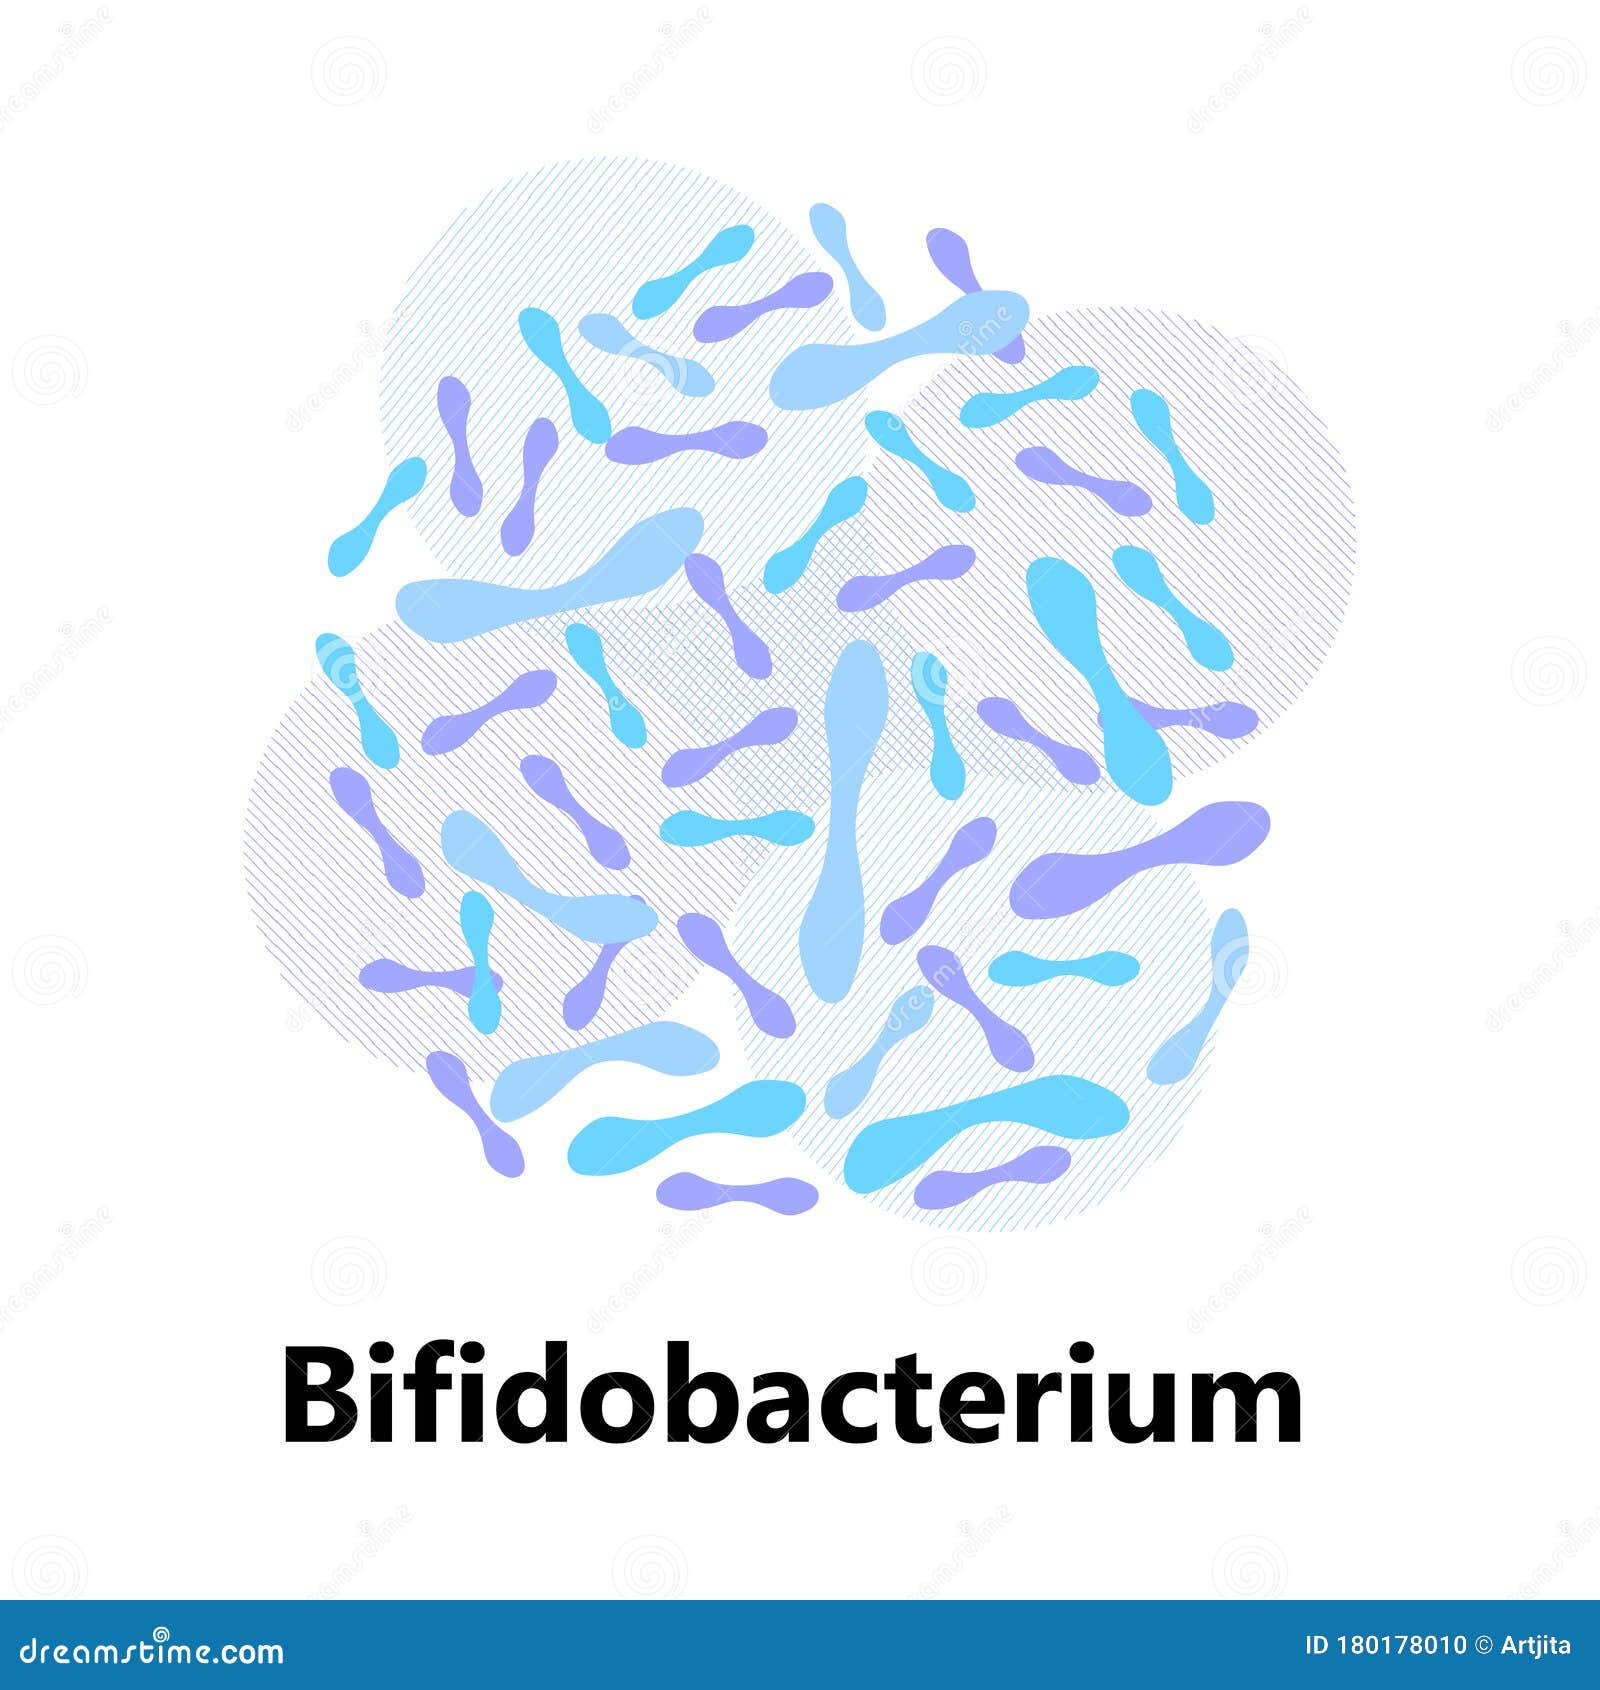 probiotics bacteria. lactobacillus, bulgaricus logo with text. amorphous s for milk products are shown such as yogurt,